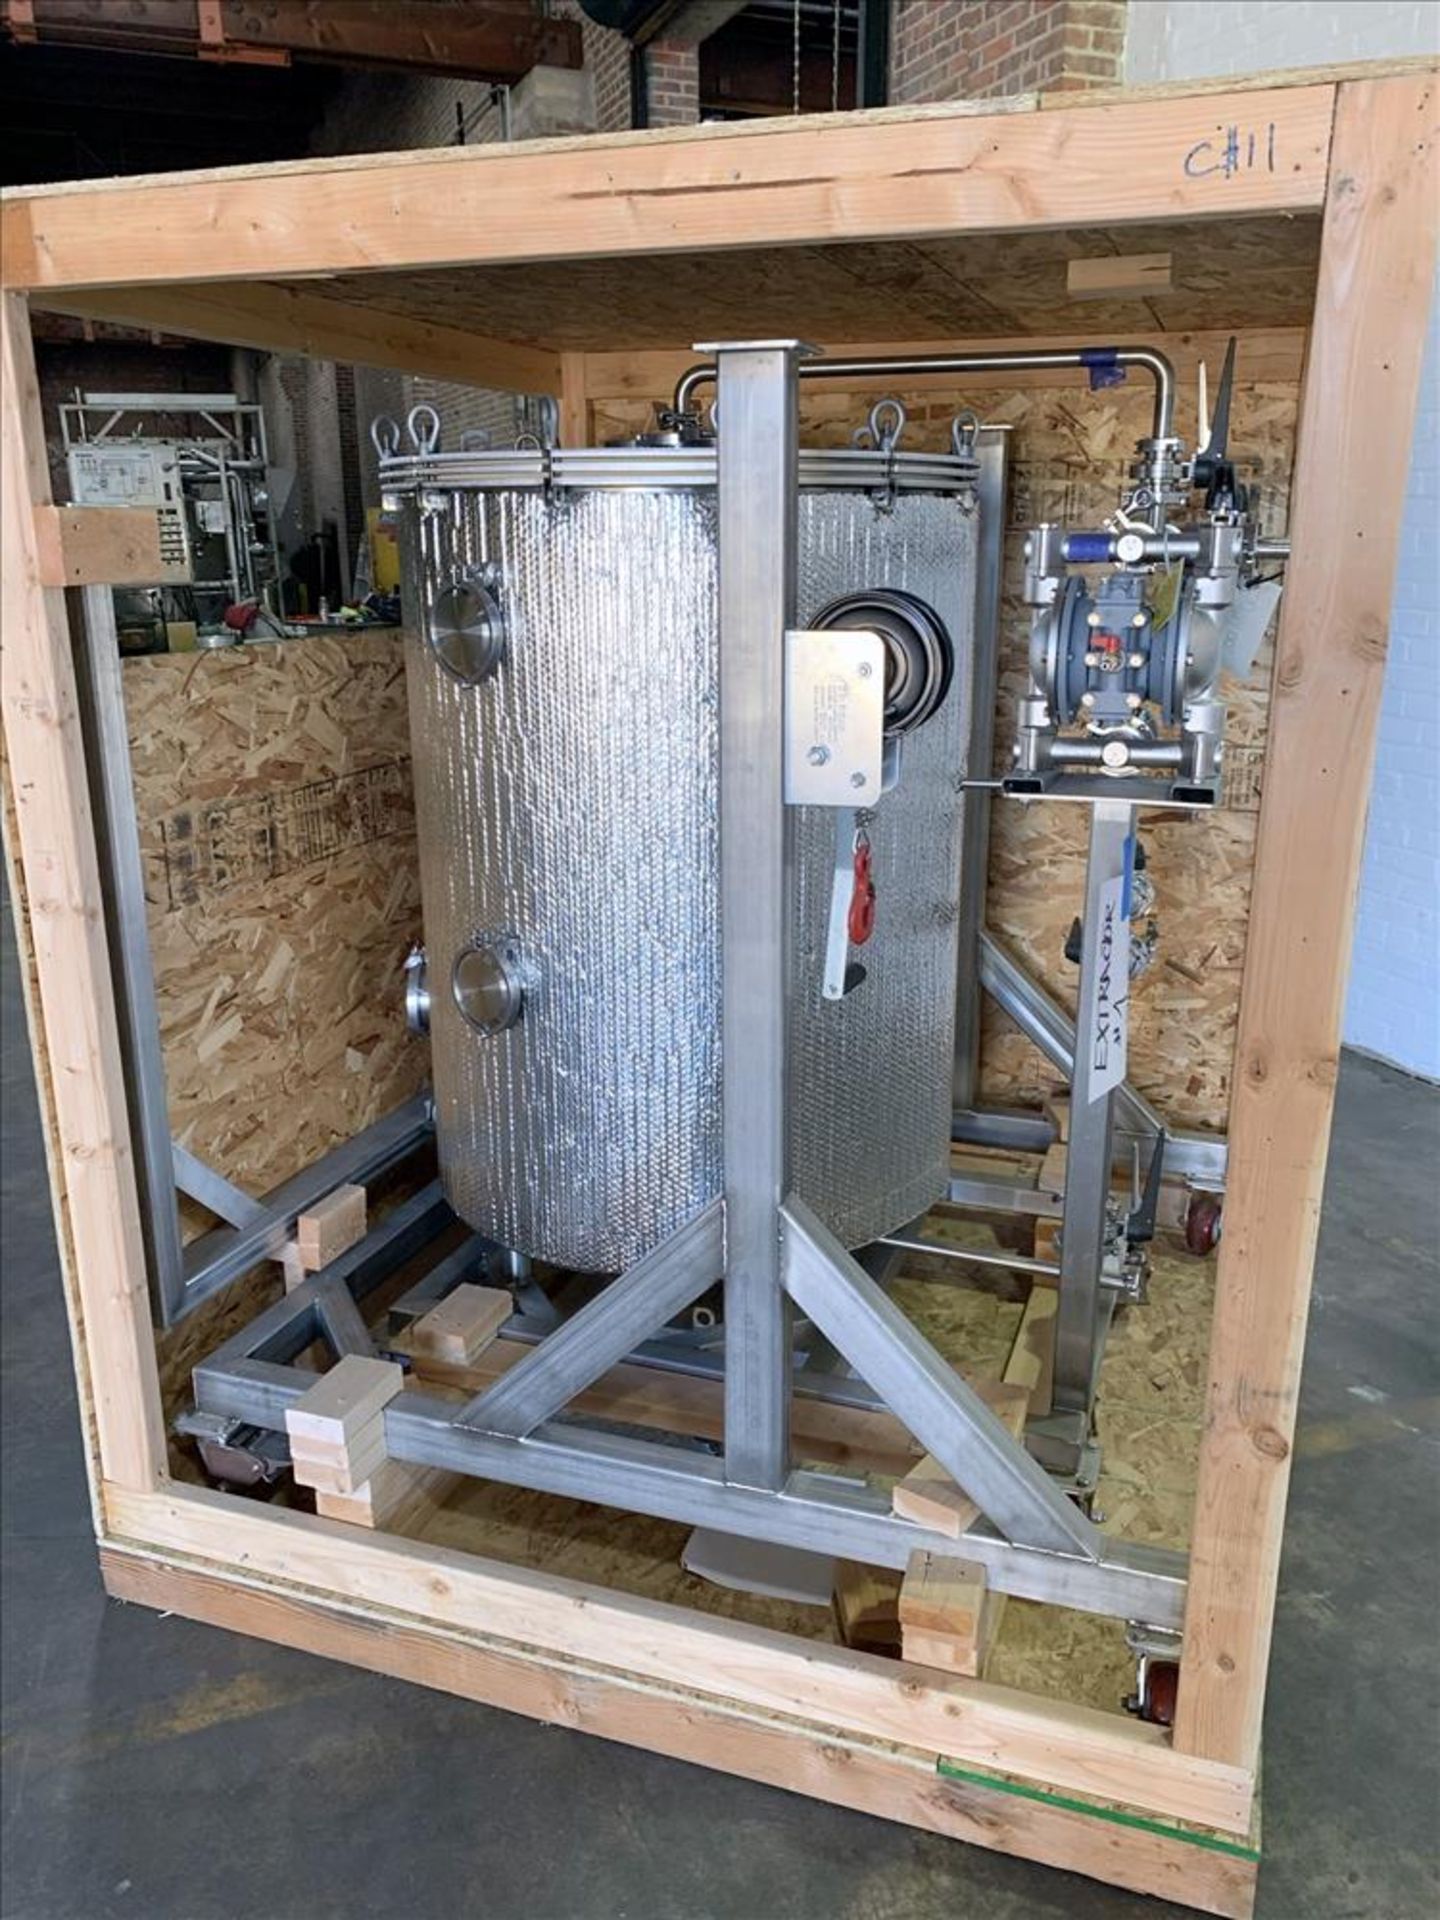 New In Crates - Eden Labs LLC Industrial 500 Gallon Performance Solvent Recovery System - Image 52 of 152